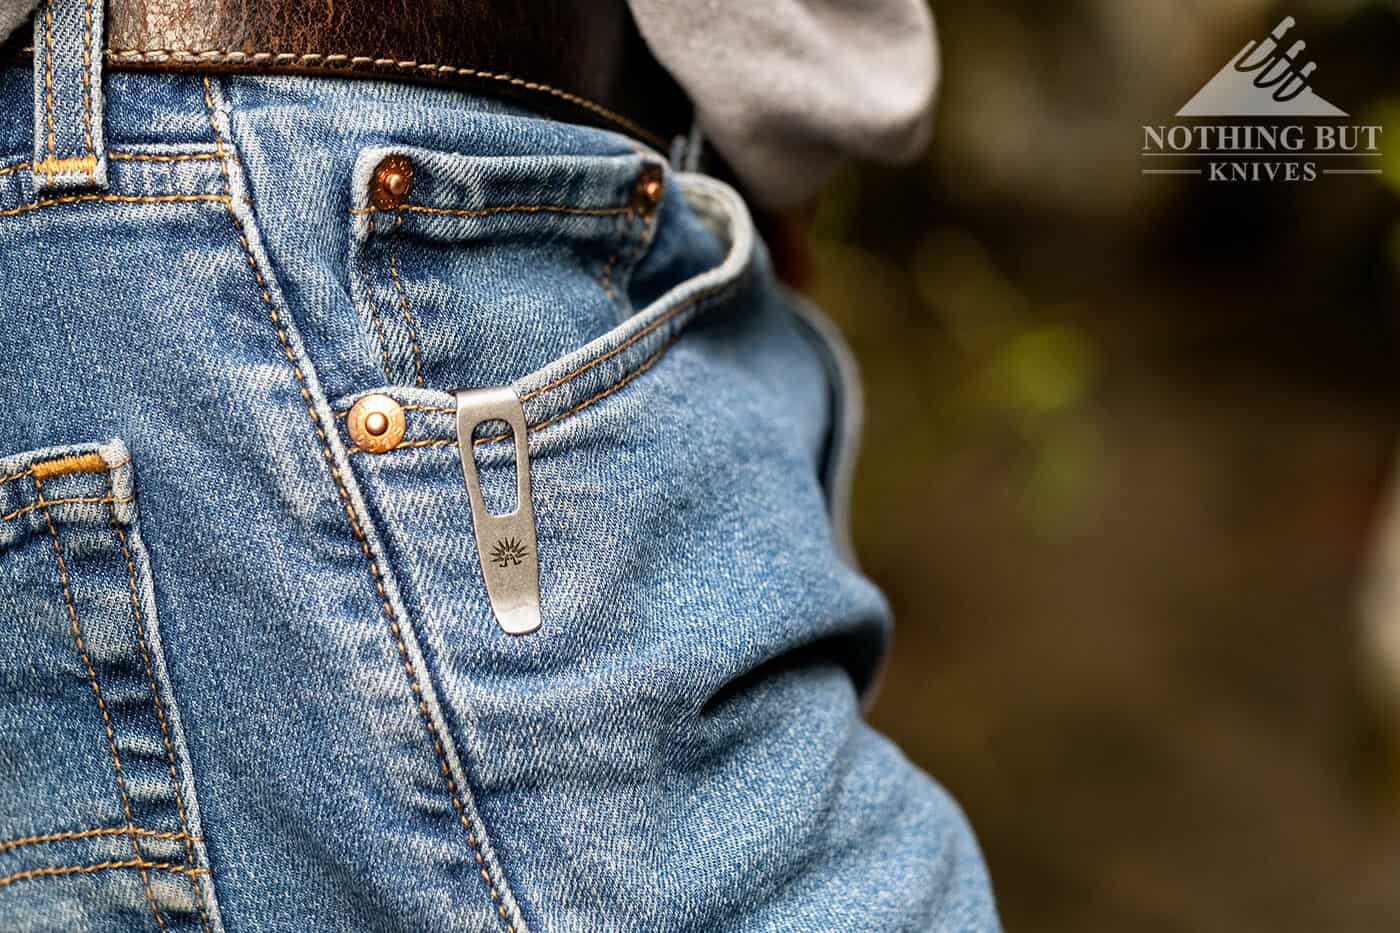 A pocketknife in sitting deep in the pocket of a pair of jeans. 